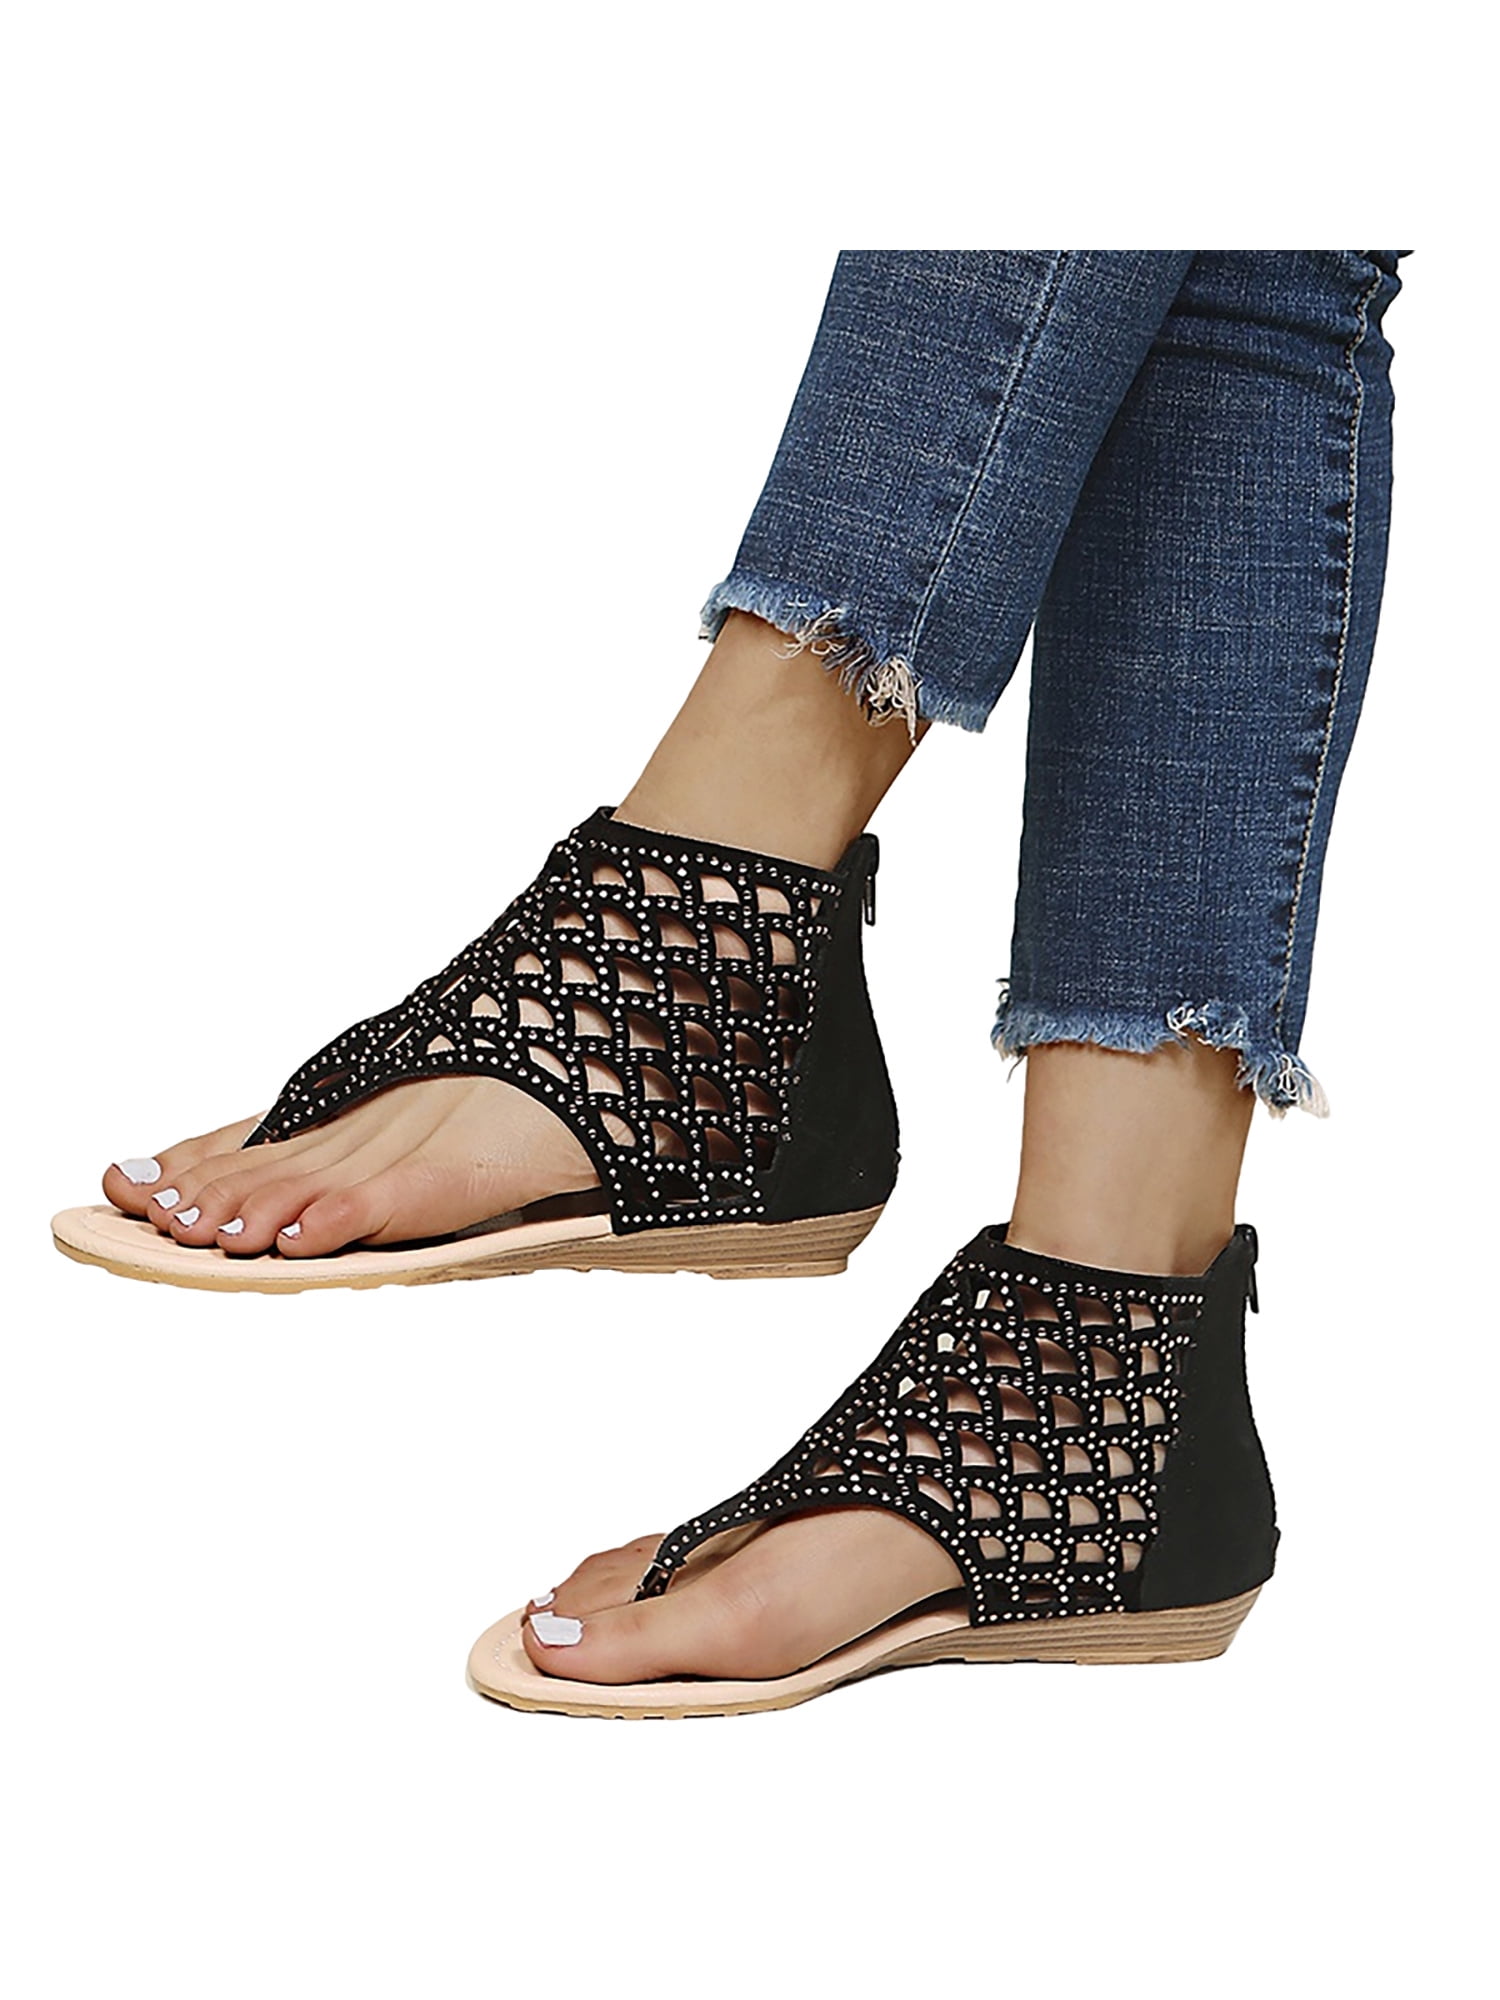 Brand New Women's Roman Gladiator Sandals Flats Available in 4 Styles 